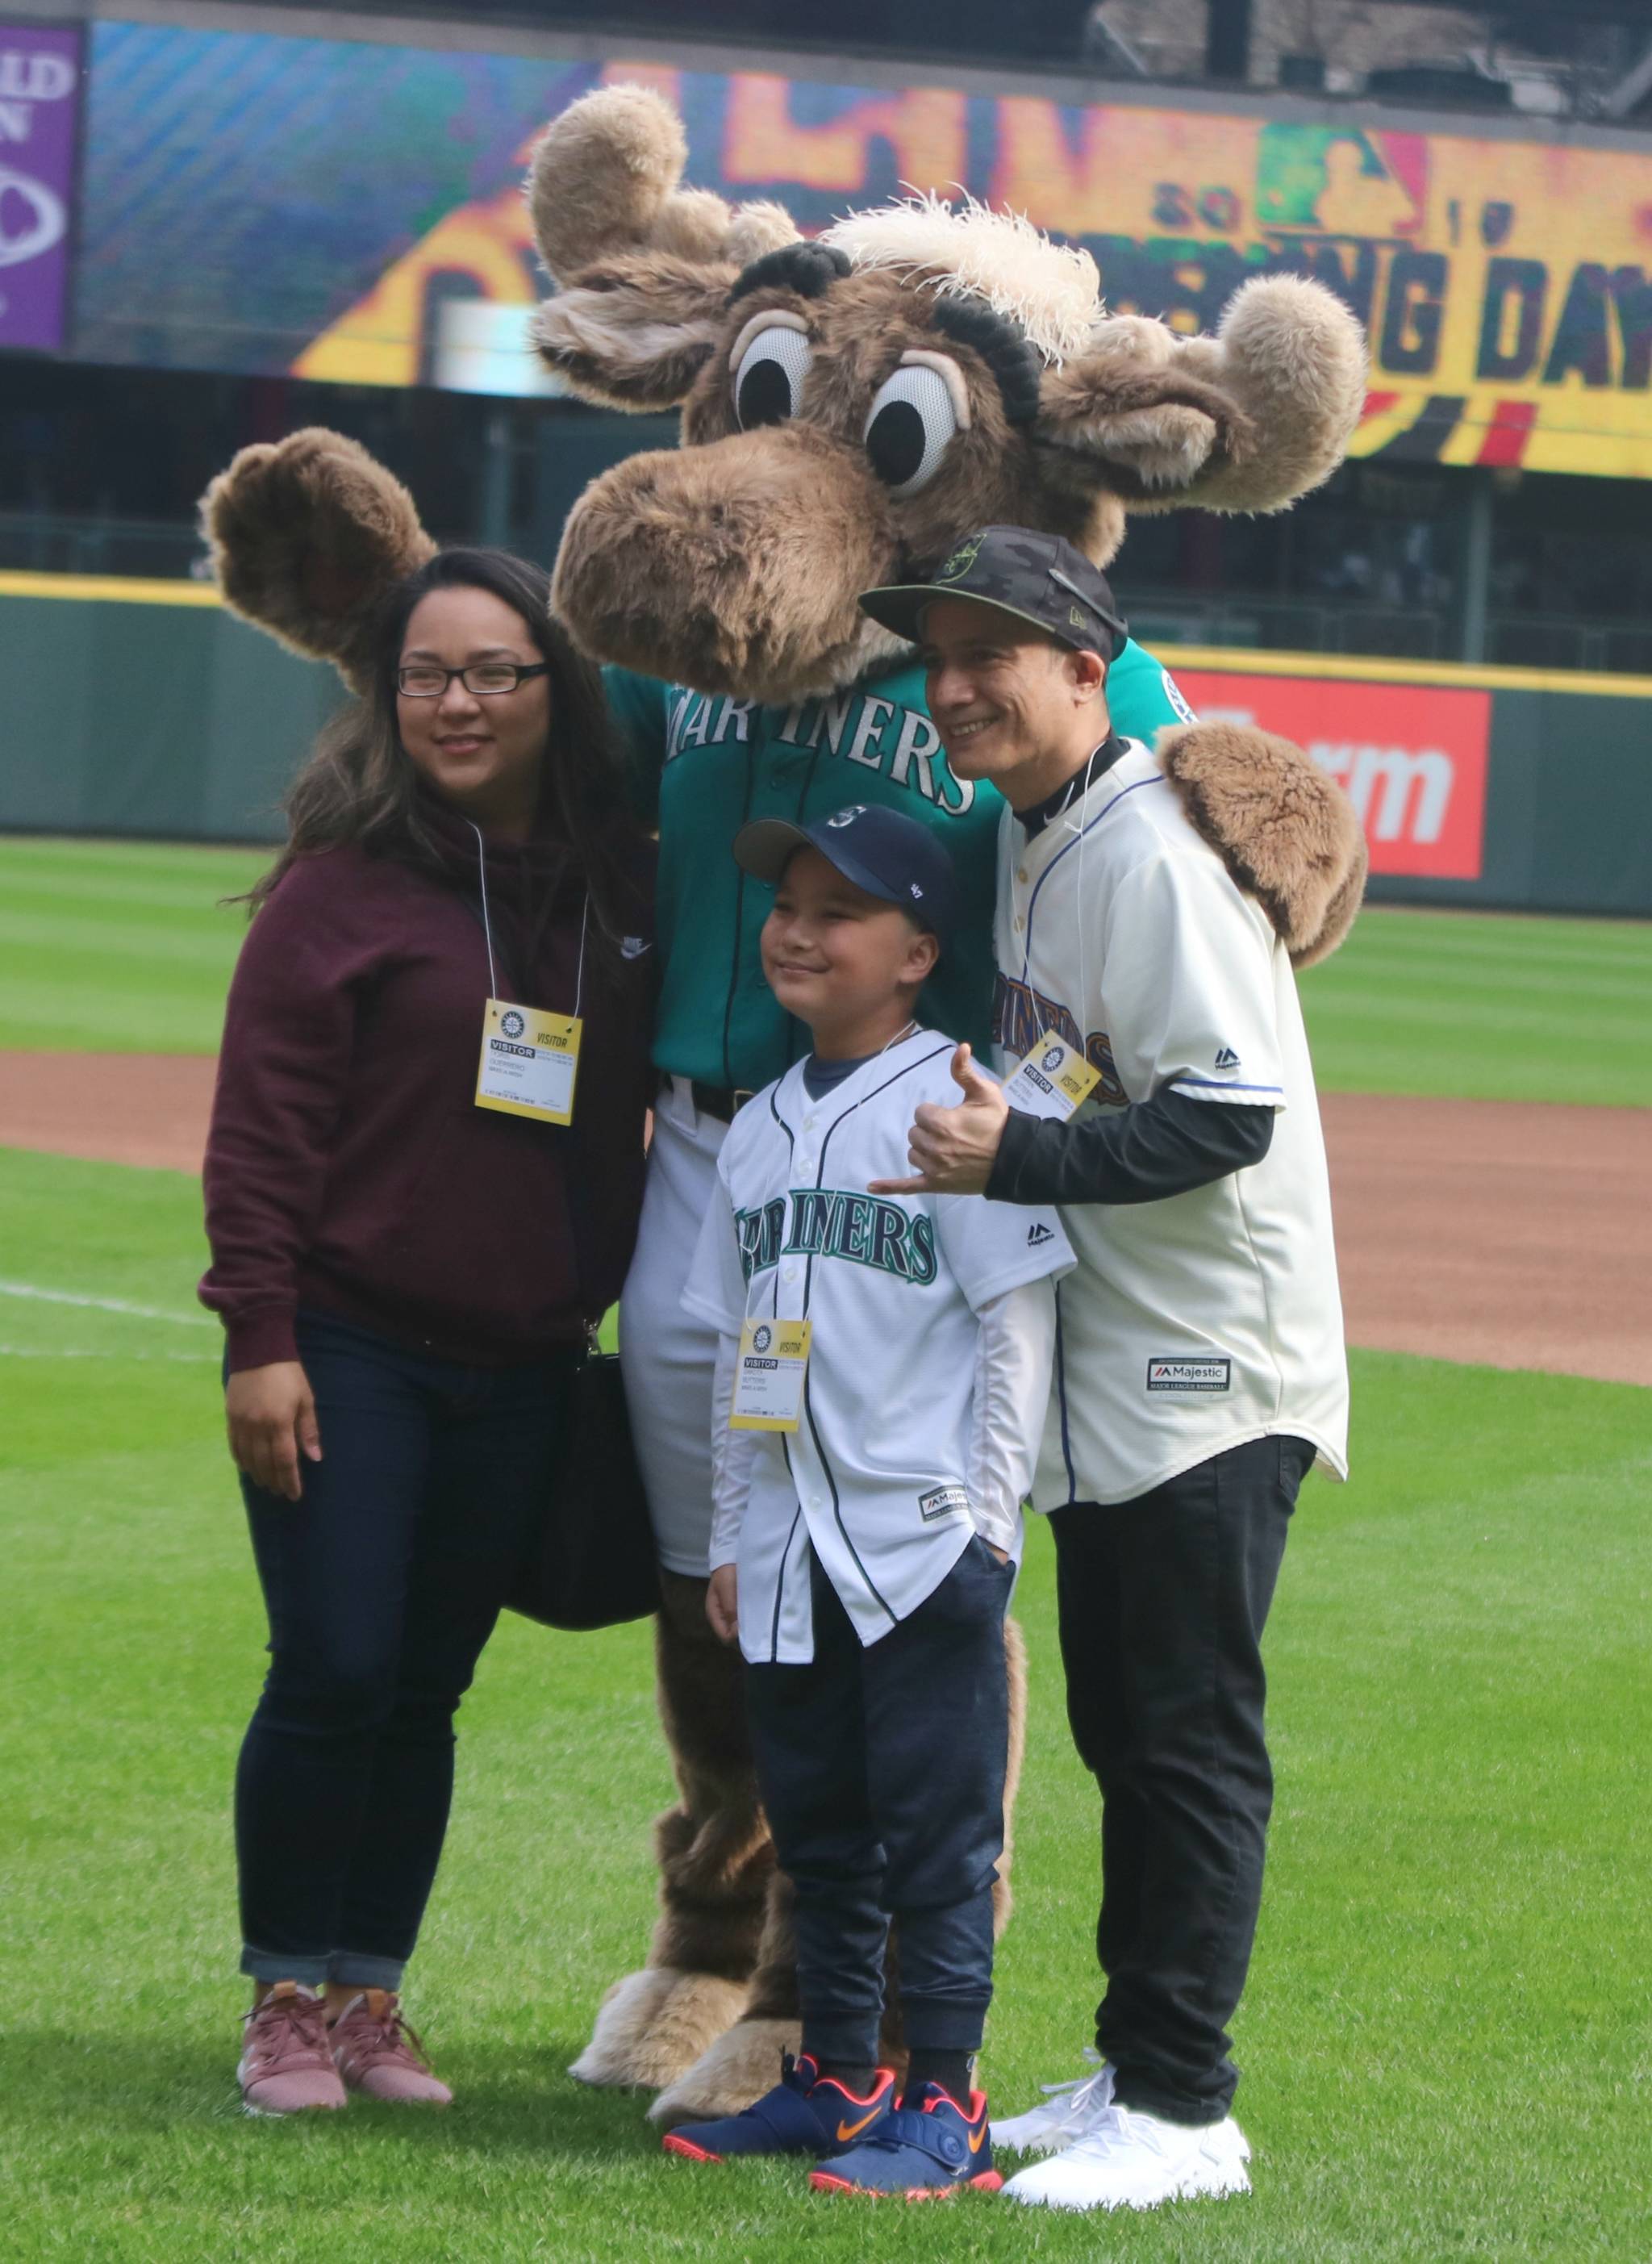 A family photo with the Mariner Moose. Andy Nystrom / staff photo